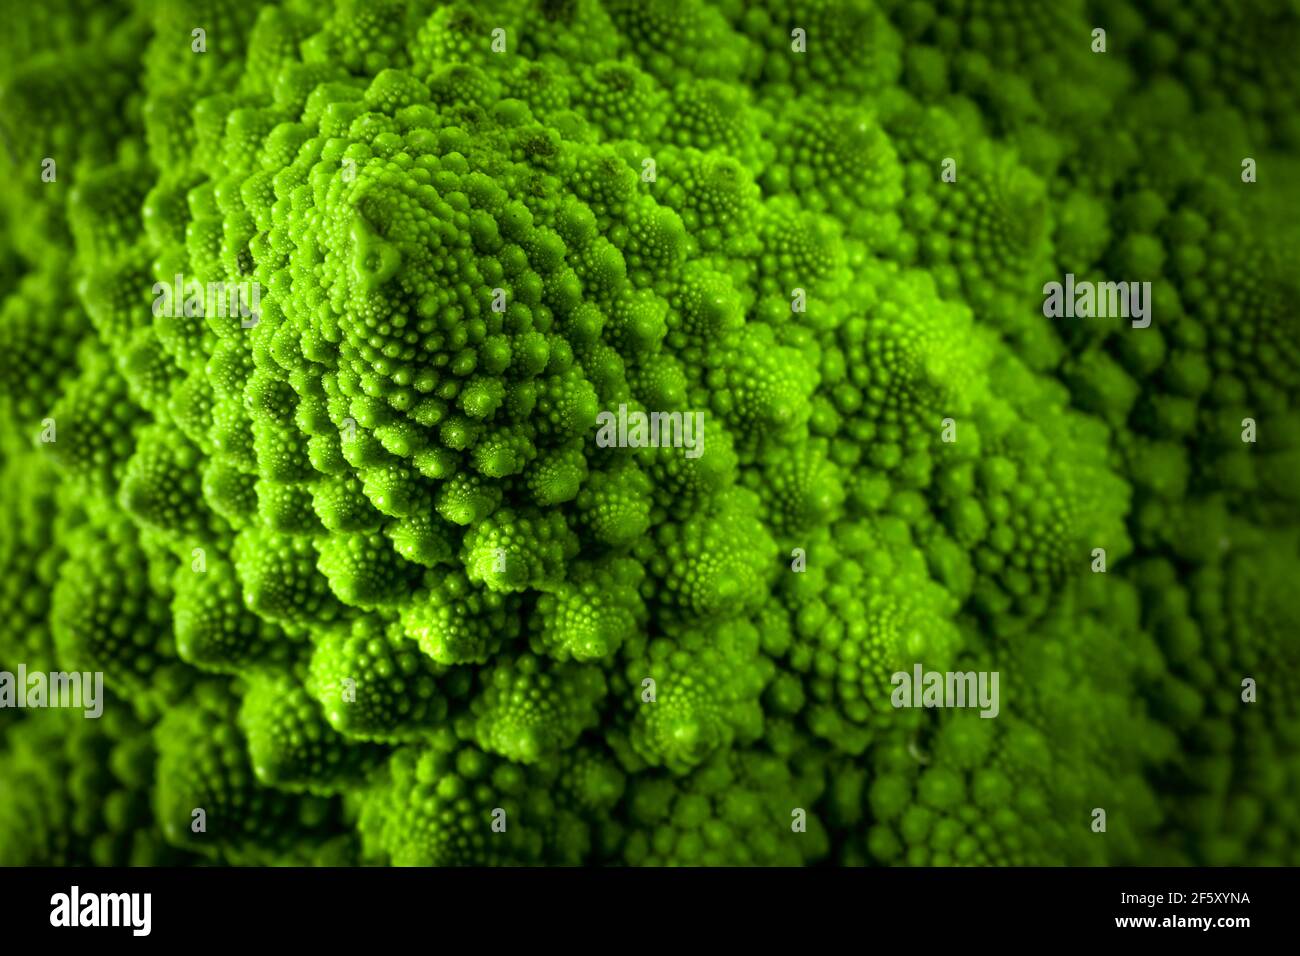 Close up of the green and fractal surface of a romanesco broccoli Stock Photo